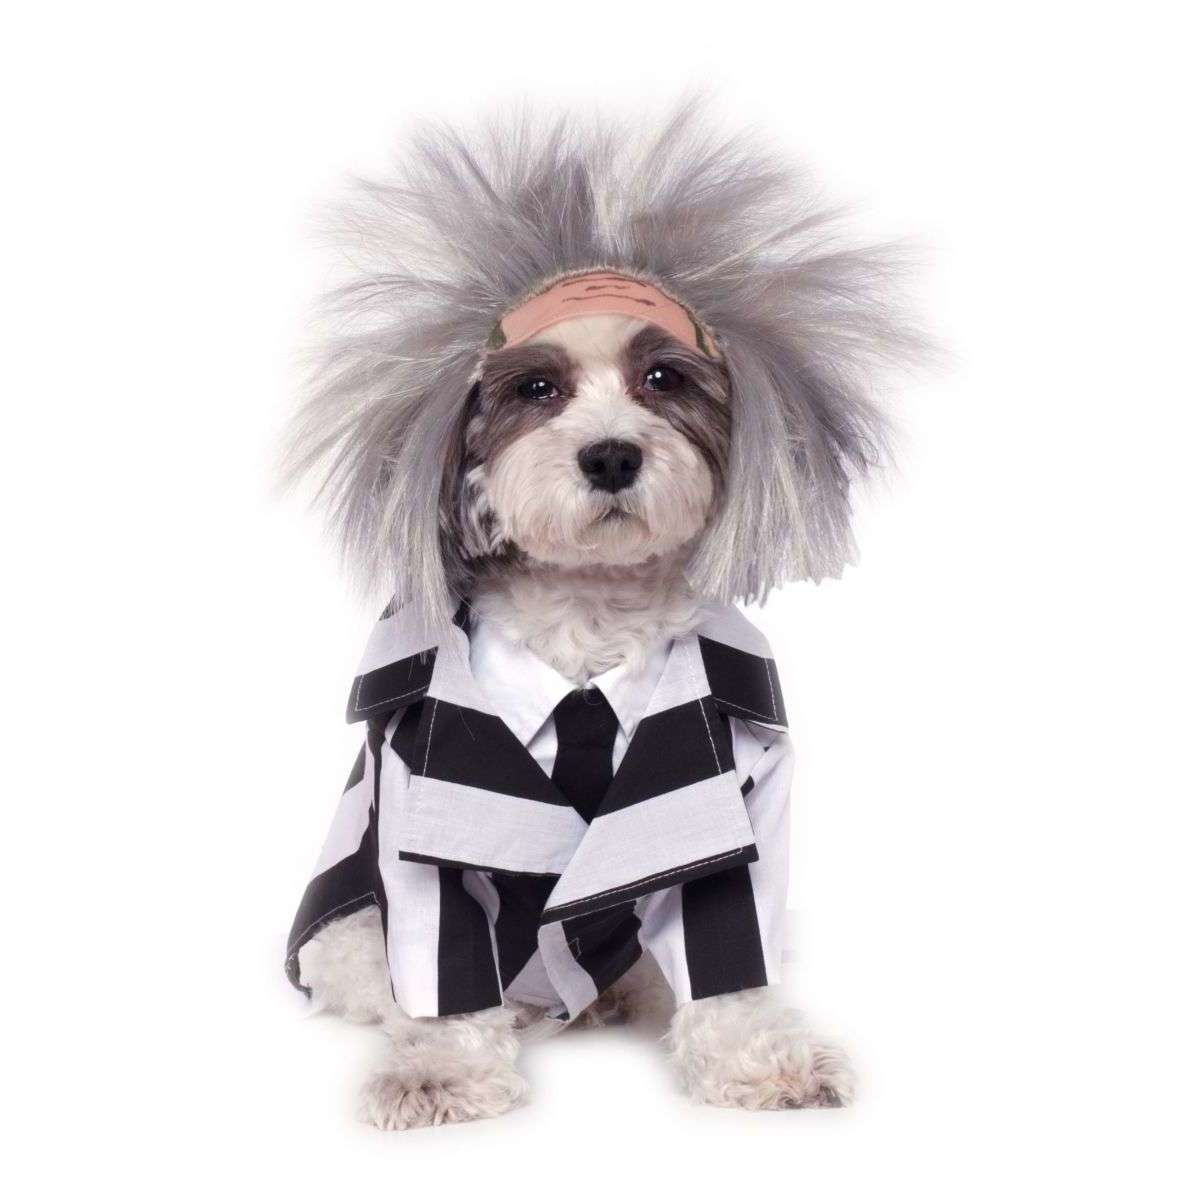 Beetlejuice Pet Costume w/ Shirtfront Tie And Wig